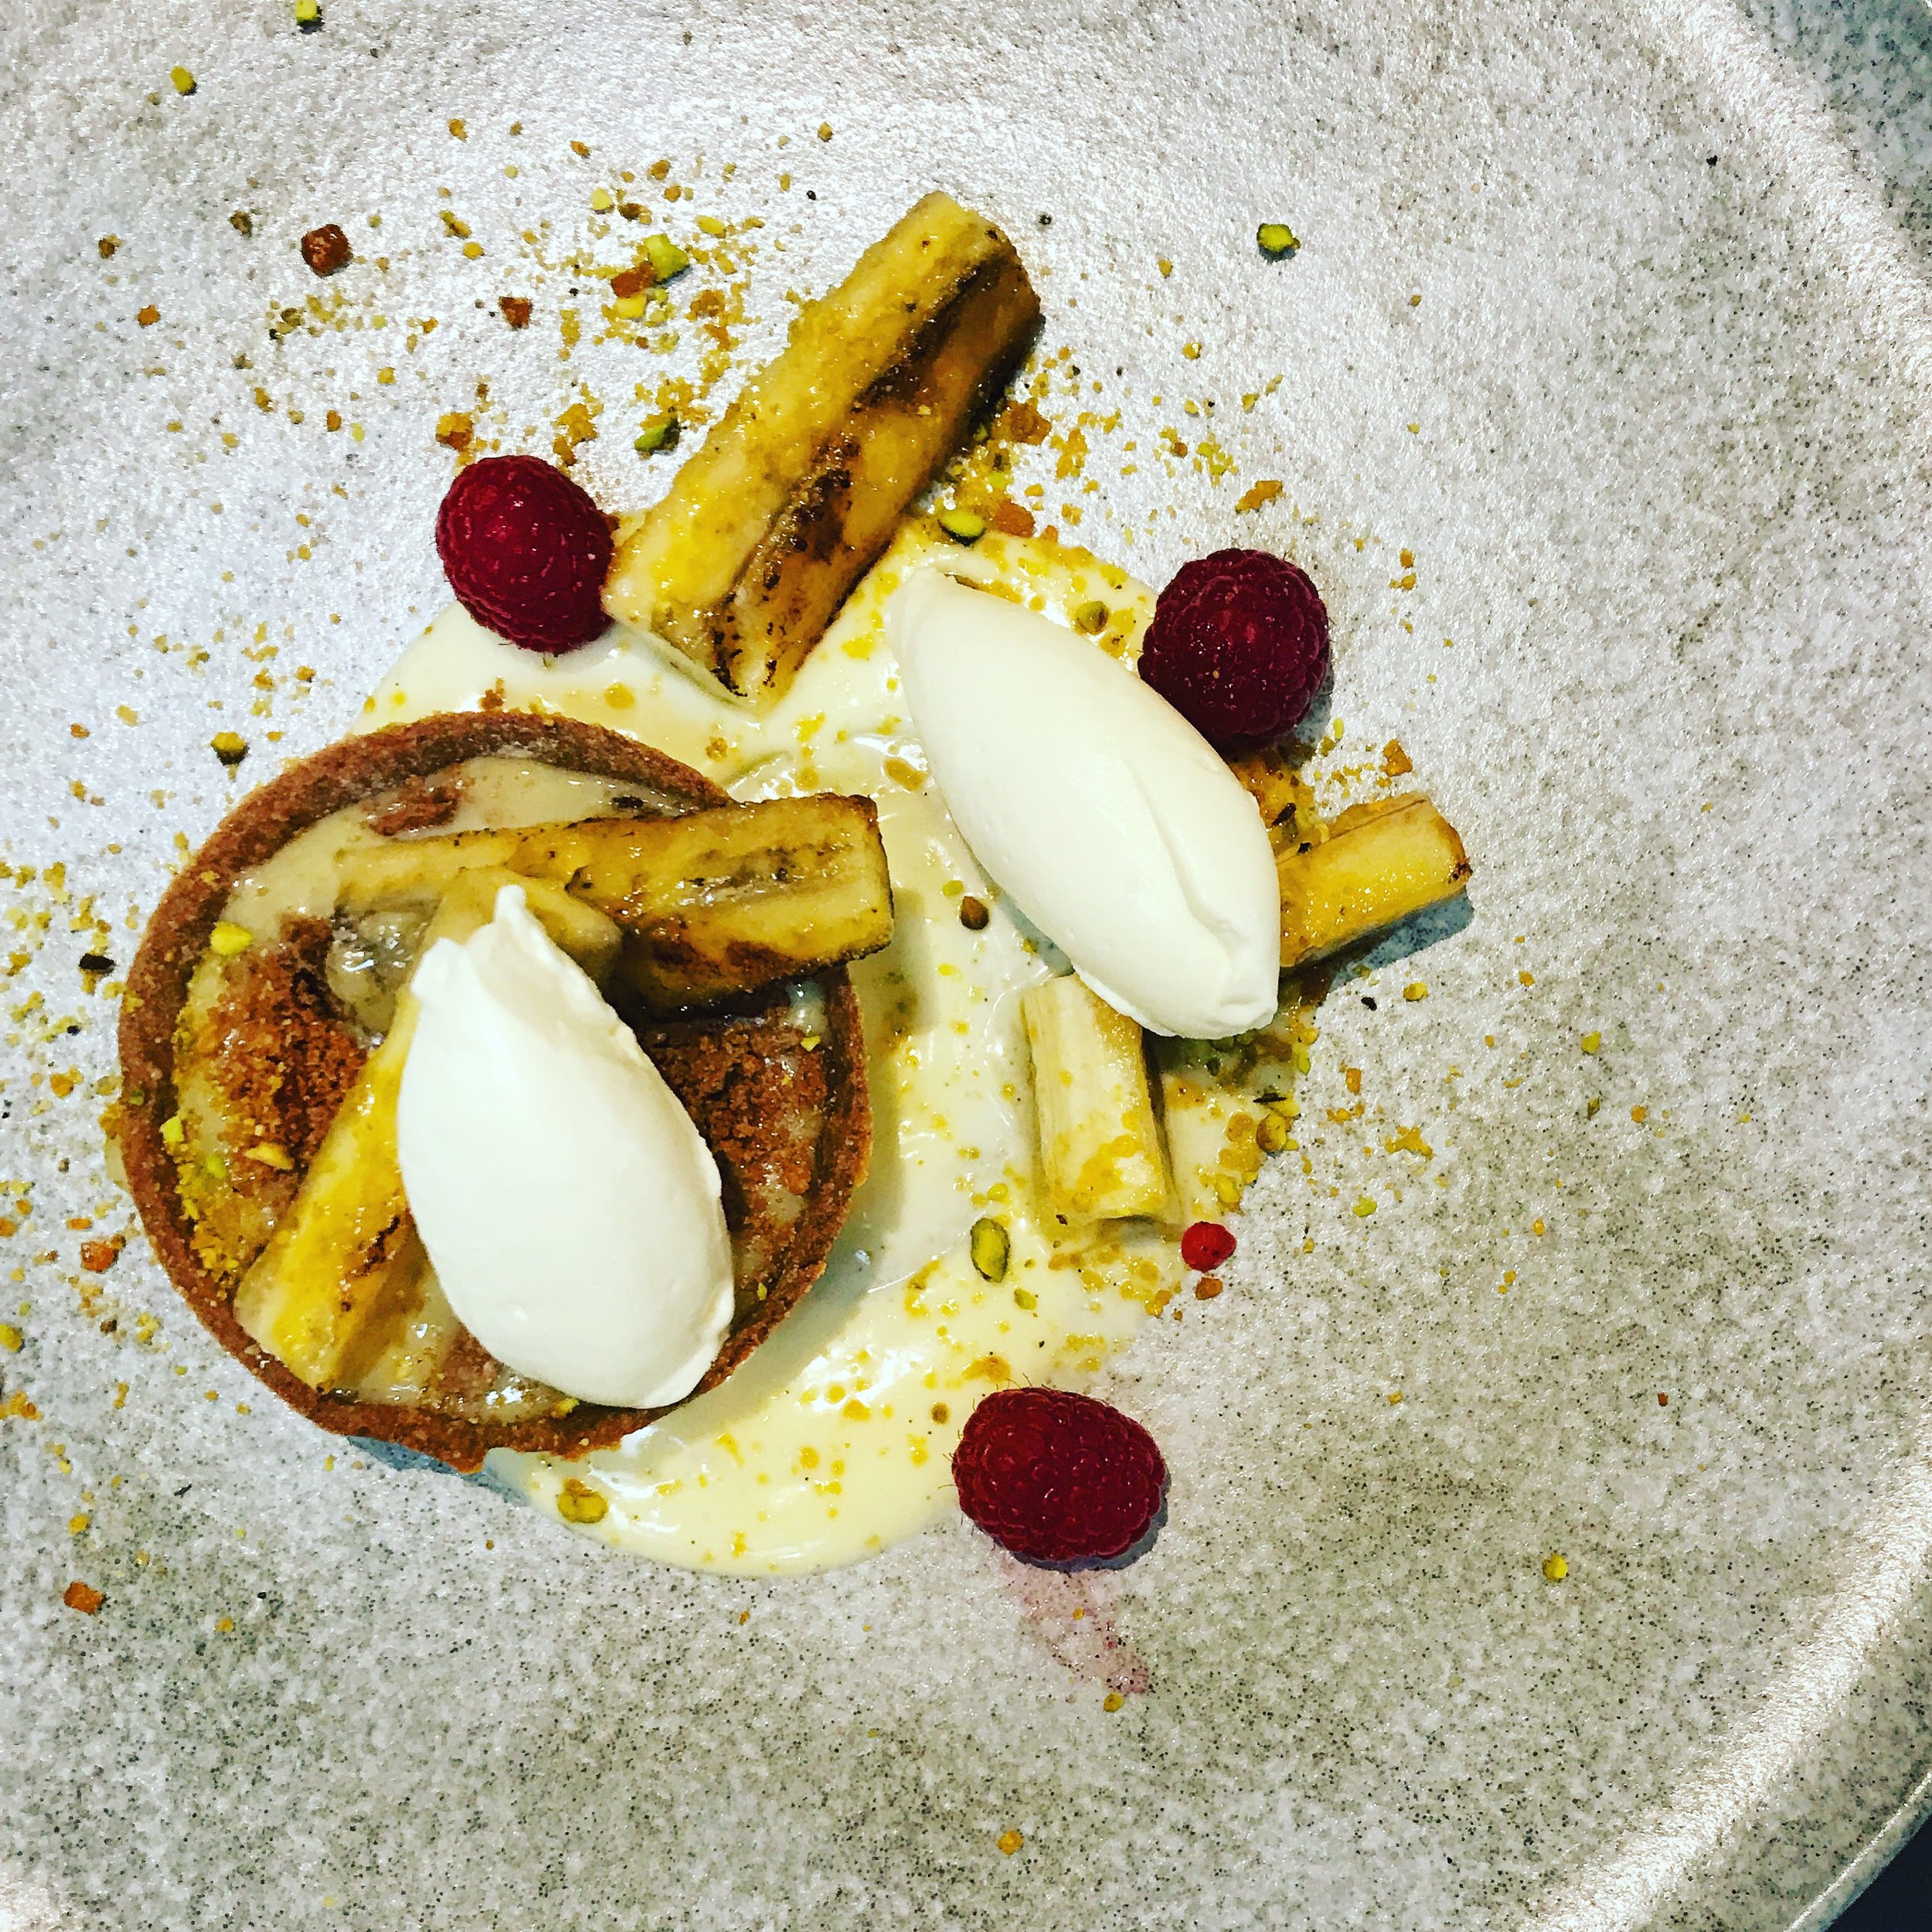  The dessert from a private dinner with some wonderful clients on Saturday night. An almost deconstructed Banoffee pie with Brûlée bananas, toffee and mascarpone, amongst other things! #dessert  #banoffeepie &nbsp; #food &nbsp; #sydney  #sydneyeats &